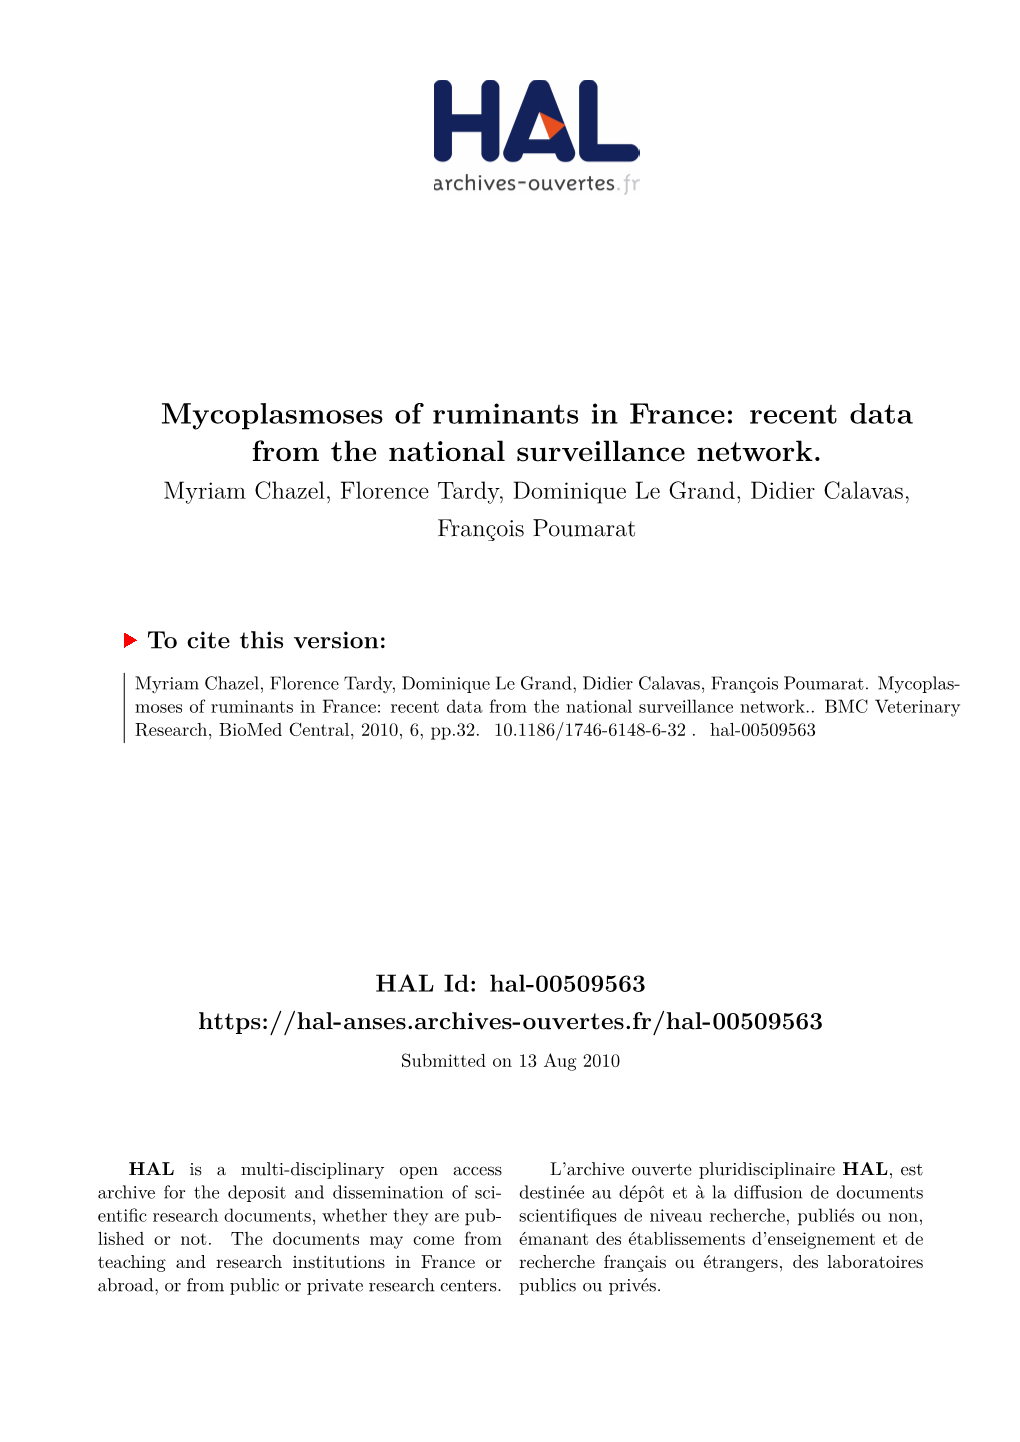 Mycoplasmoses of Ruminants in France: Recent Data from the National Surveillance Network